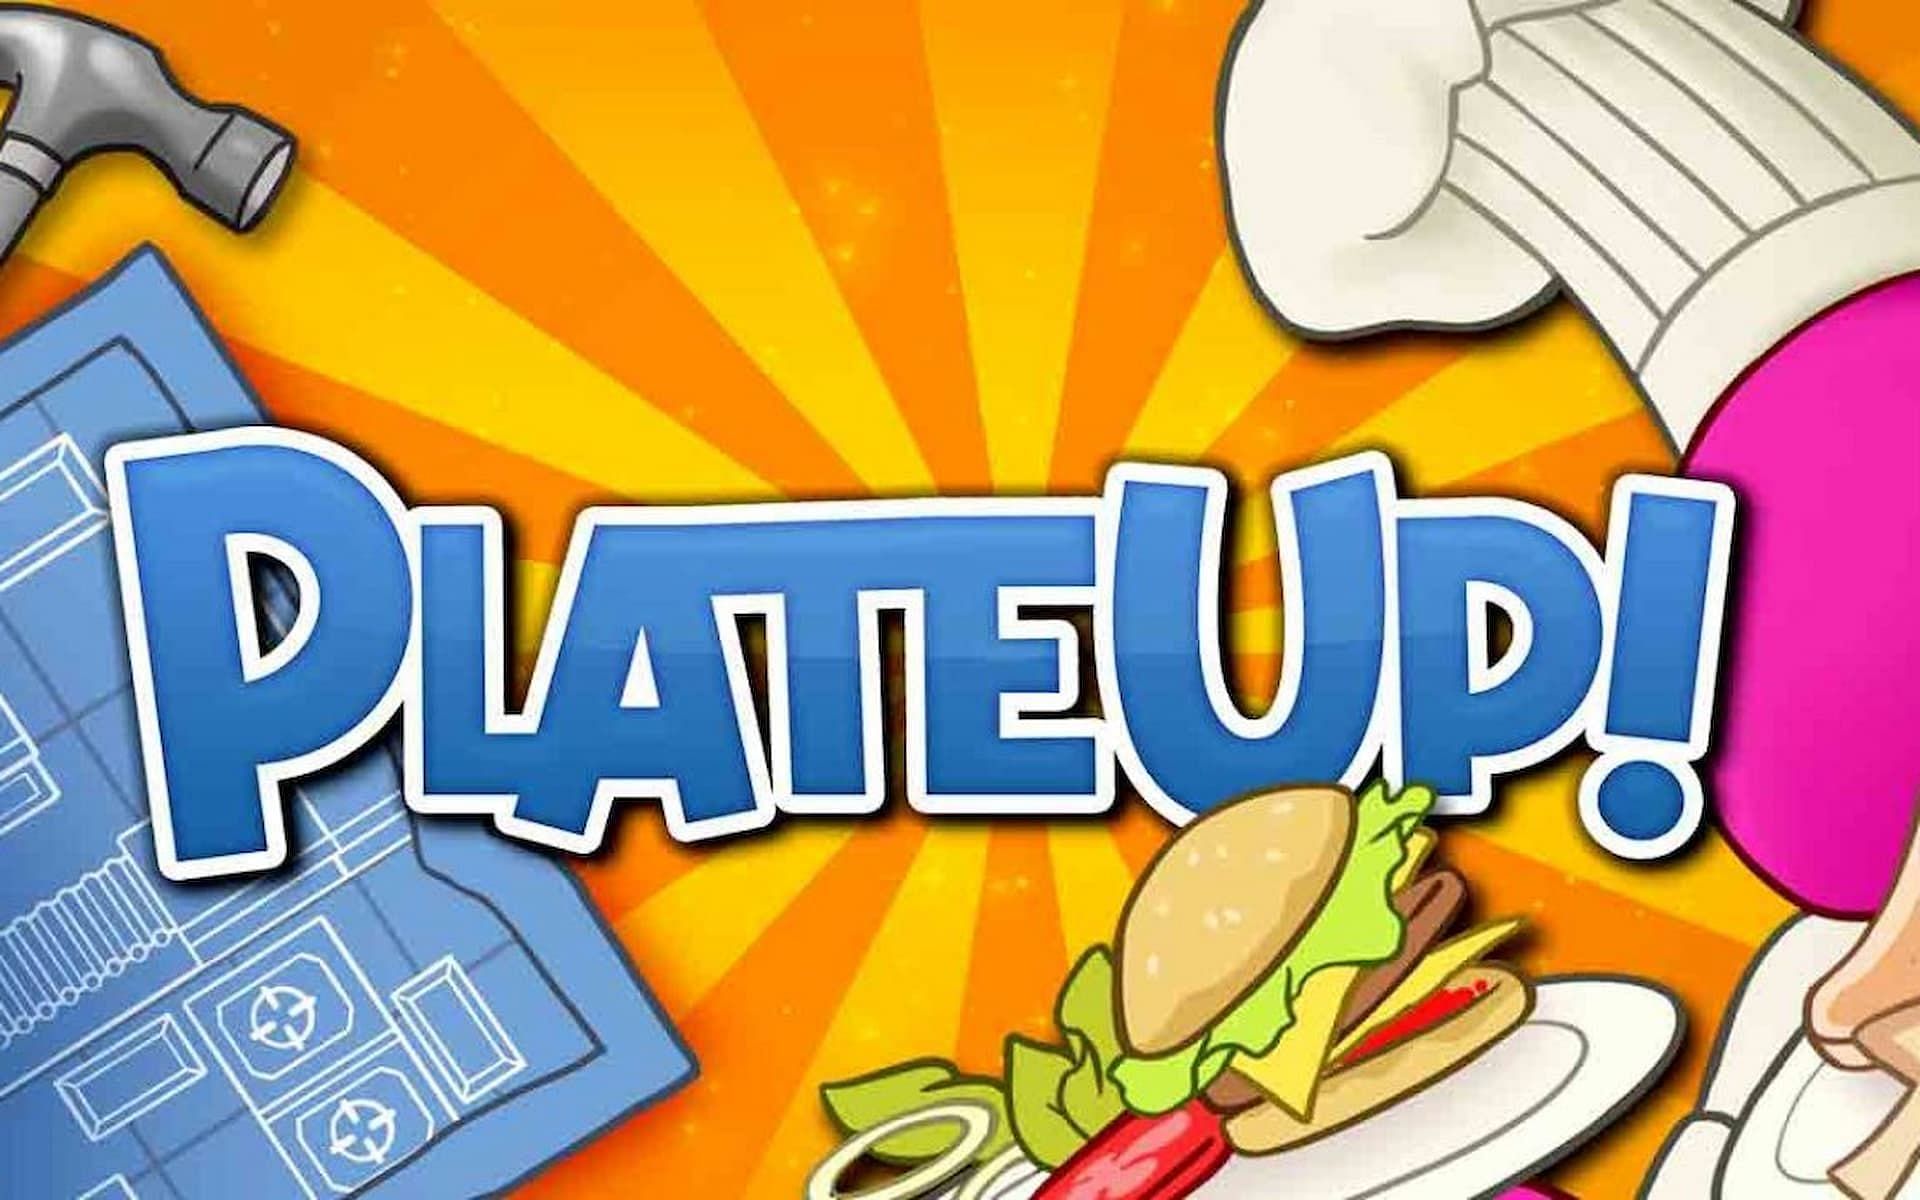 A promotional image for PlateUp (Image via Yogscast Games)